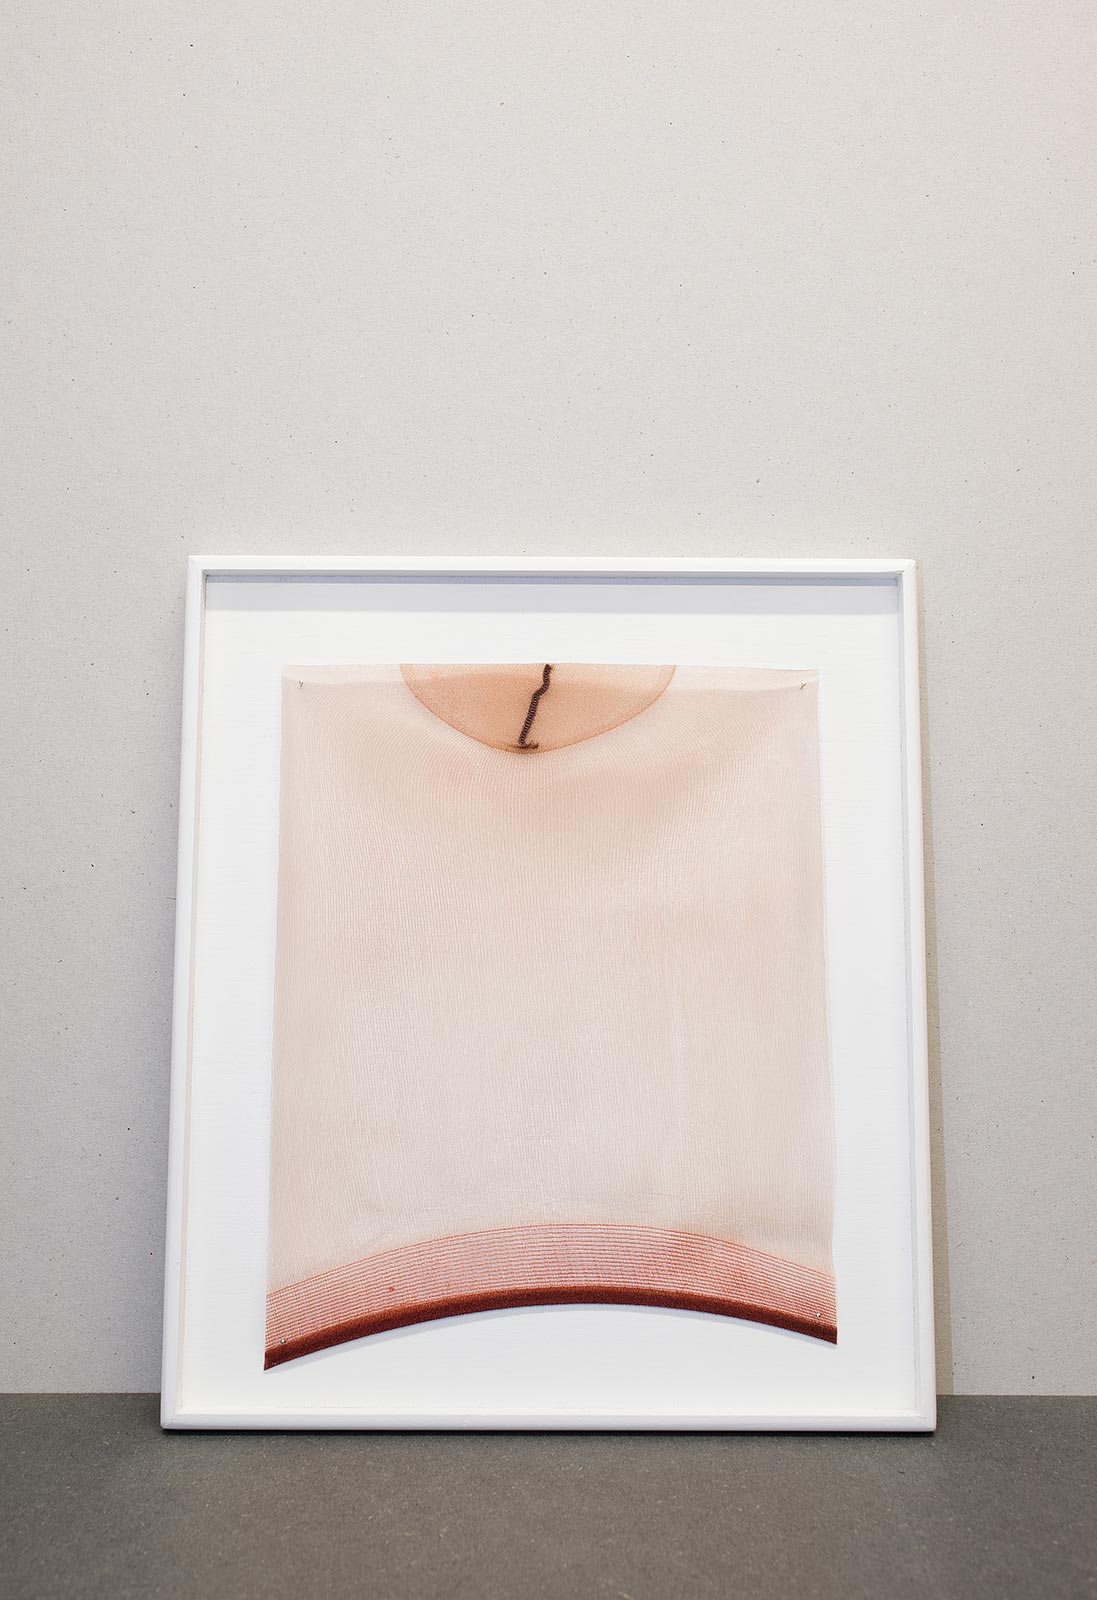 A rectangular shape was cut from a polyamide sock with cured epoxy resin and mounted on a handmade wooden object frame